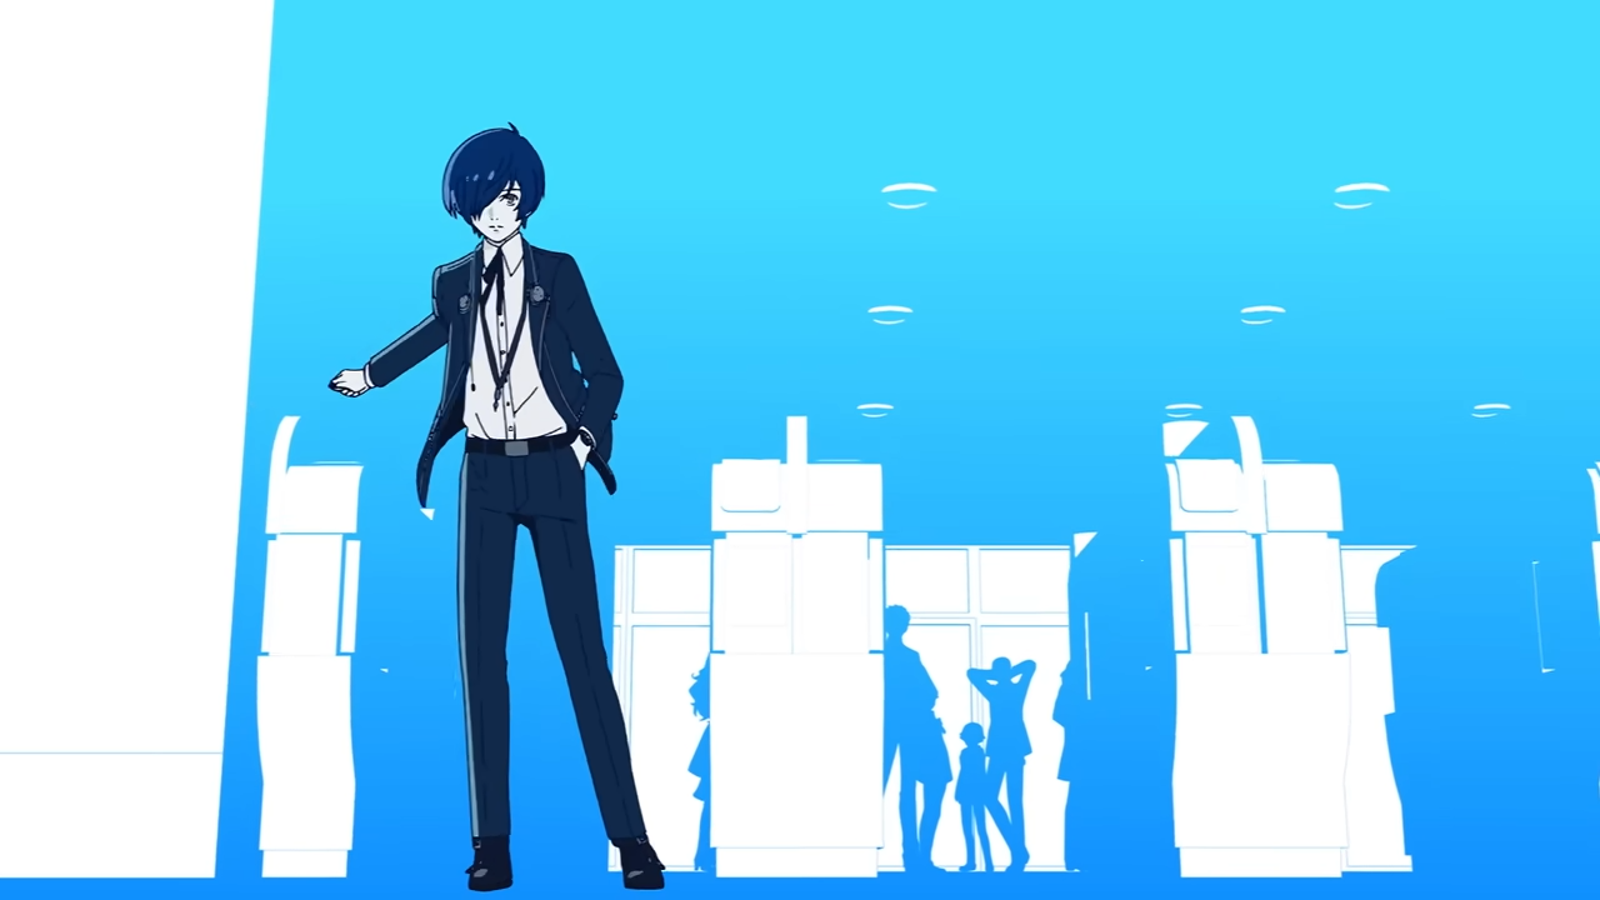  Persona 3 Reload Hintergrundbild 1600x900. Persona 3 Reload's intro video is as stylish as you'd expect